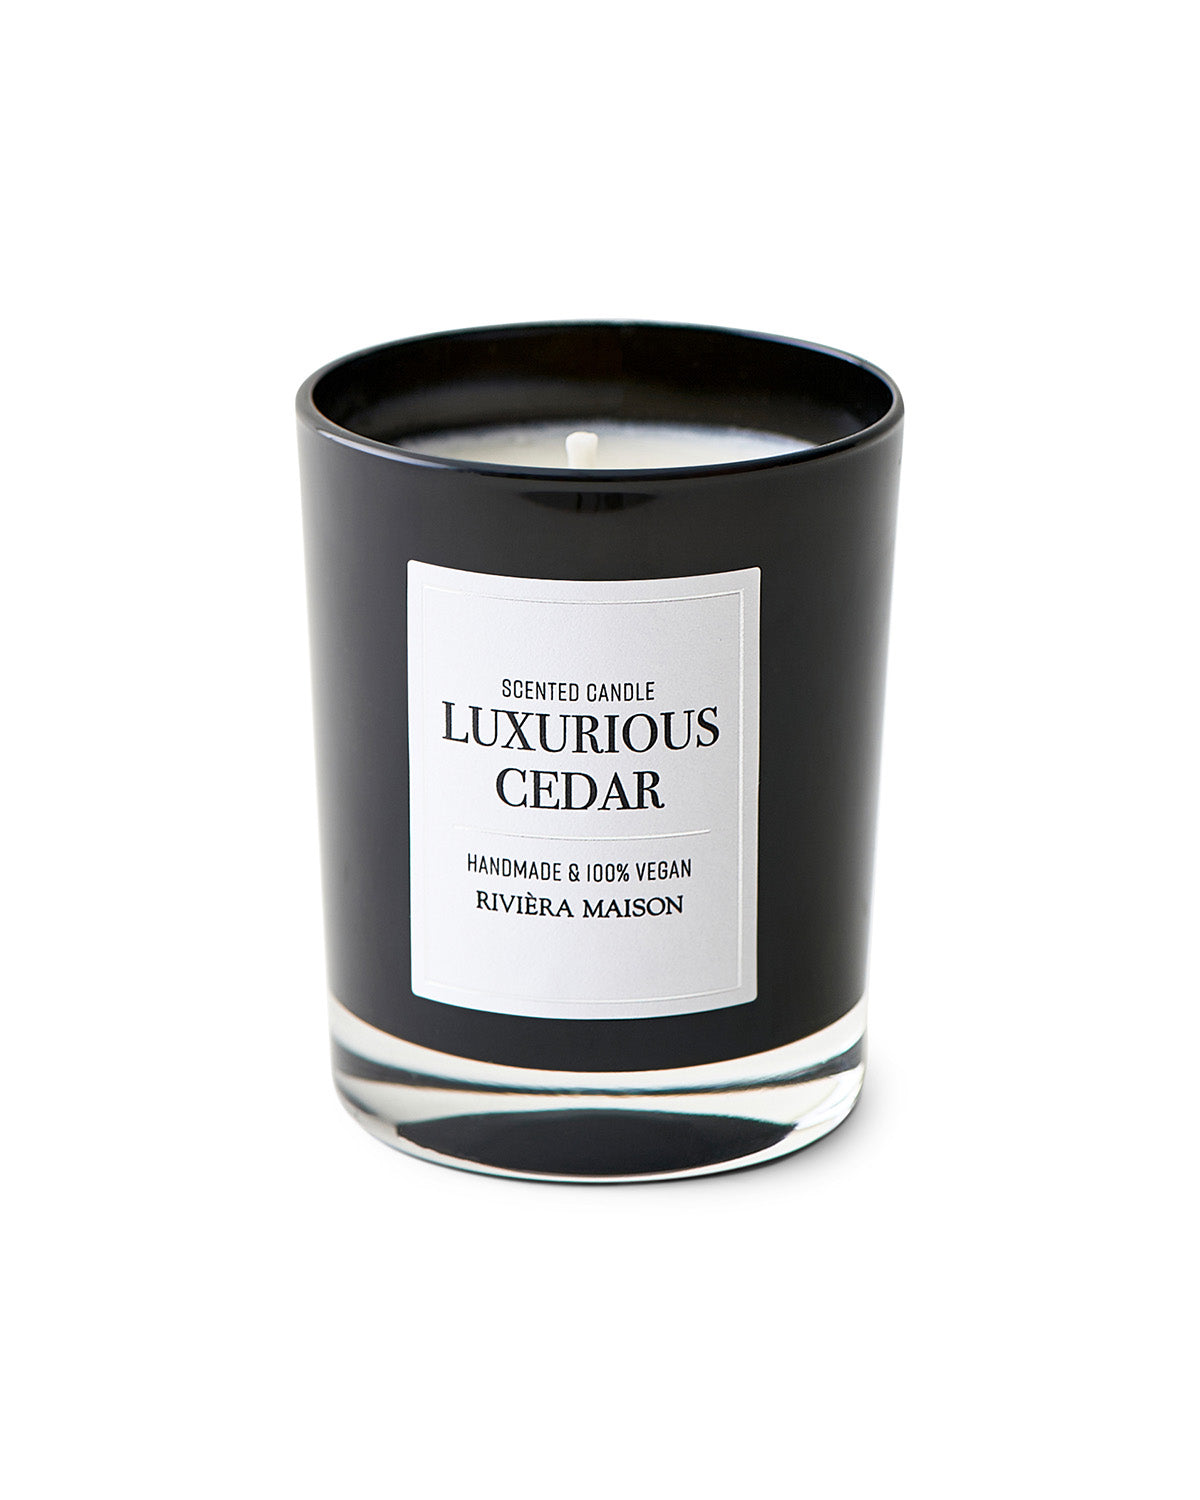 CEDAR SCENTED CANDLE in a black glass by Riviera Maison